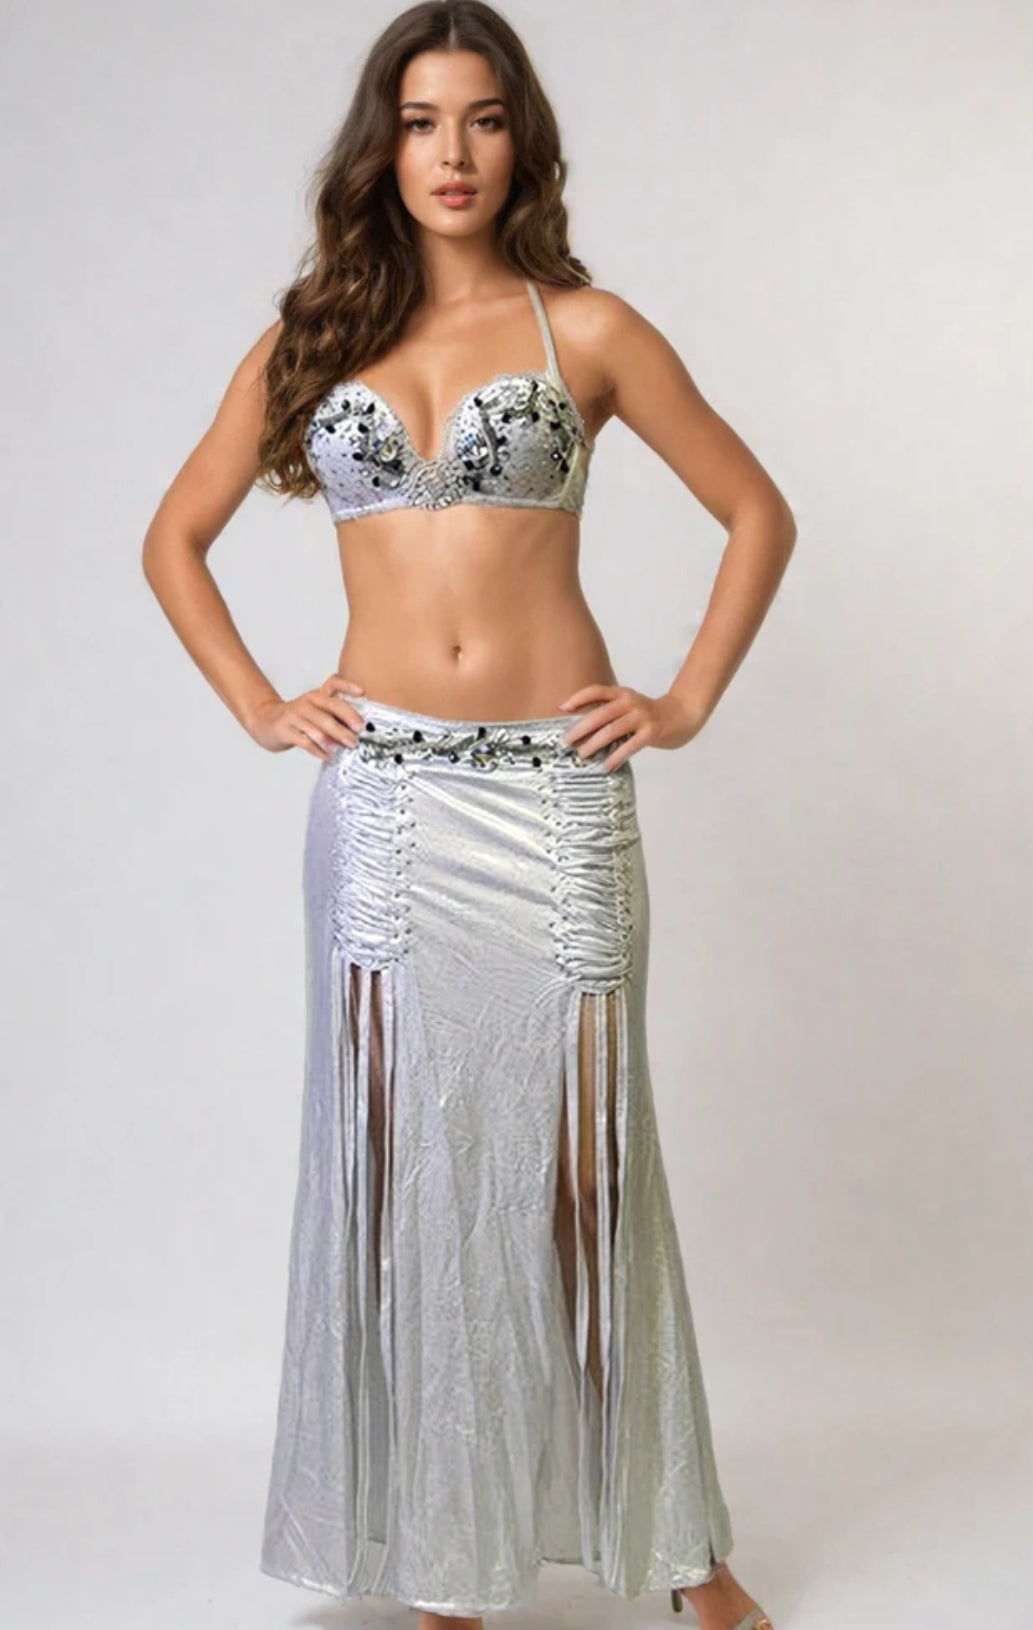 Two-Piece Costume 25301